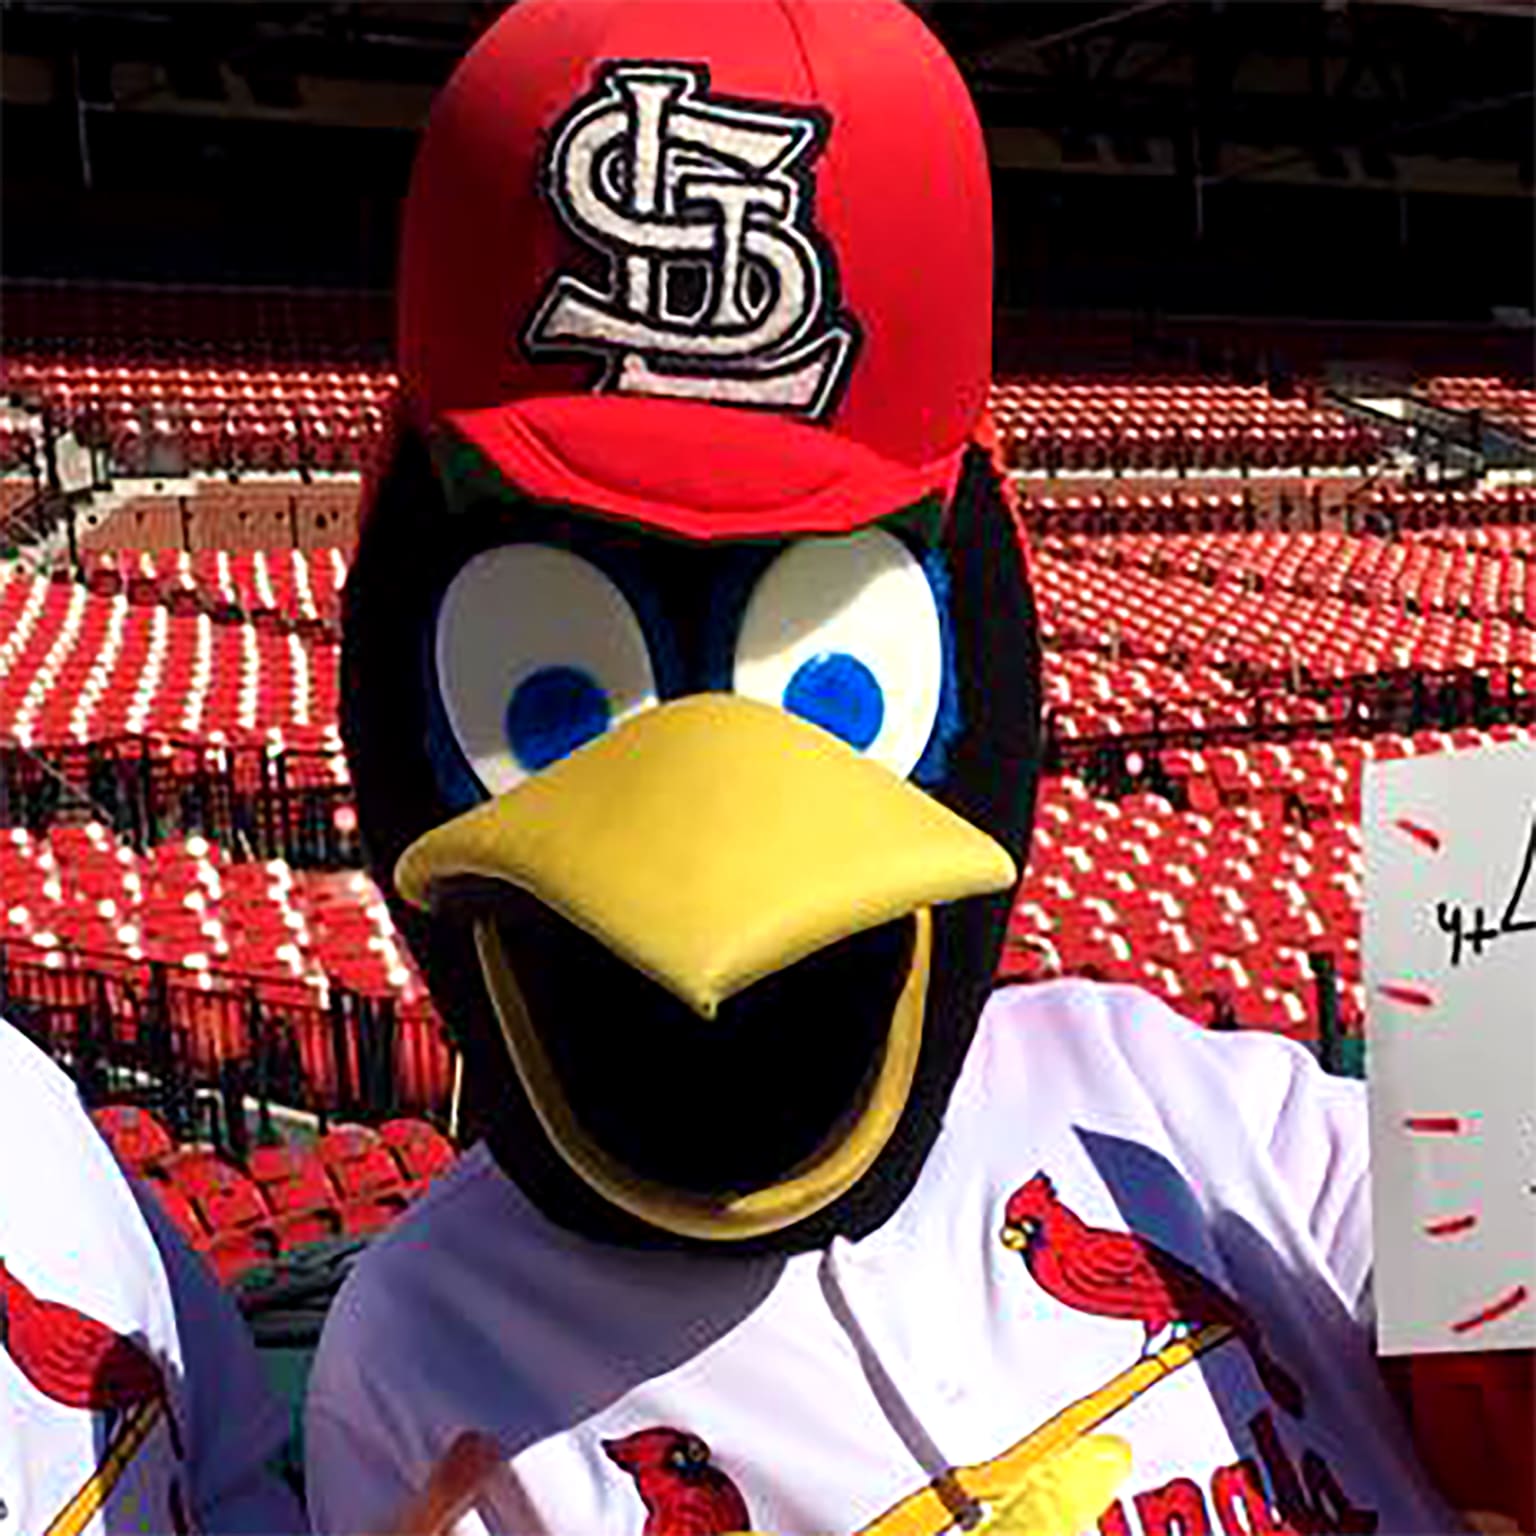 File:Fredbird, background, the team mascot for the St  130408-F-RN211-050.jpg - Wikipedia